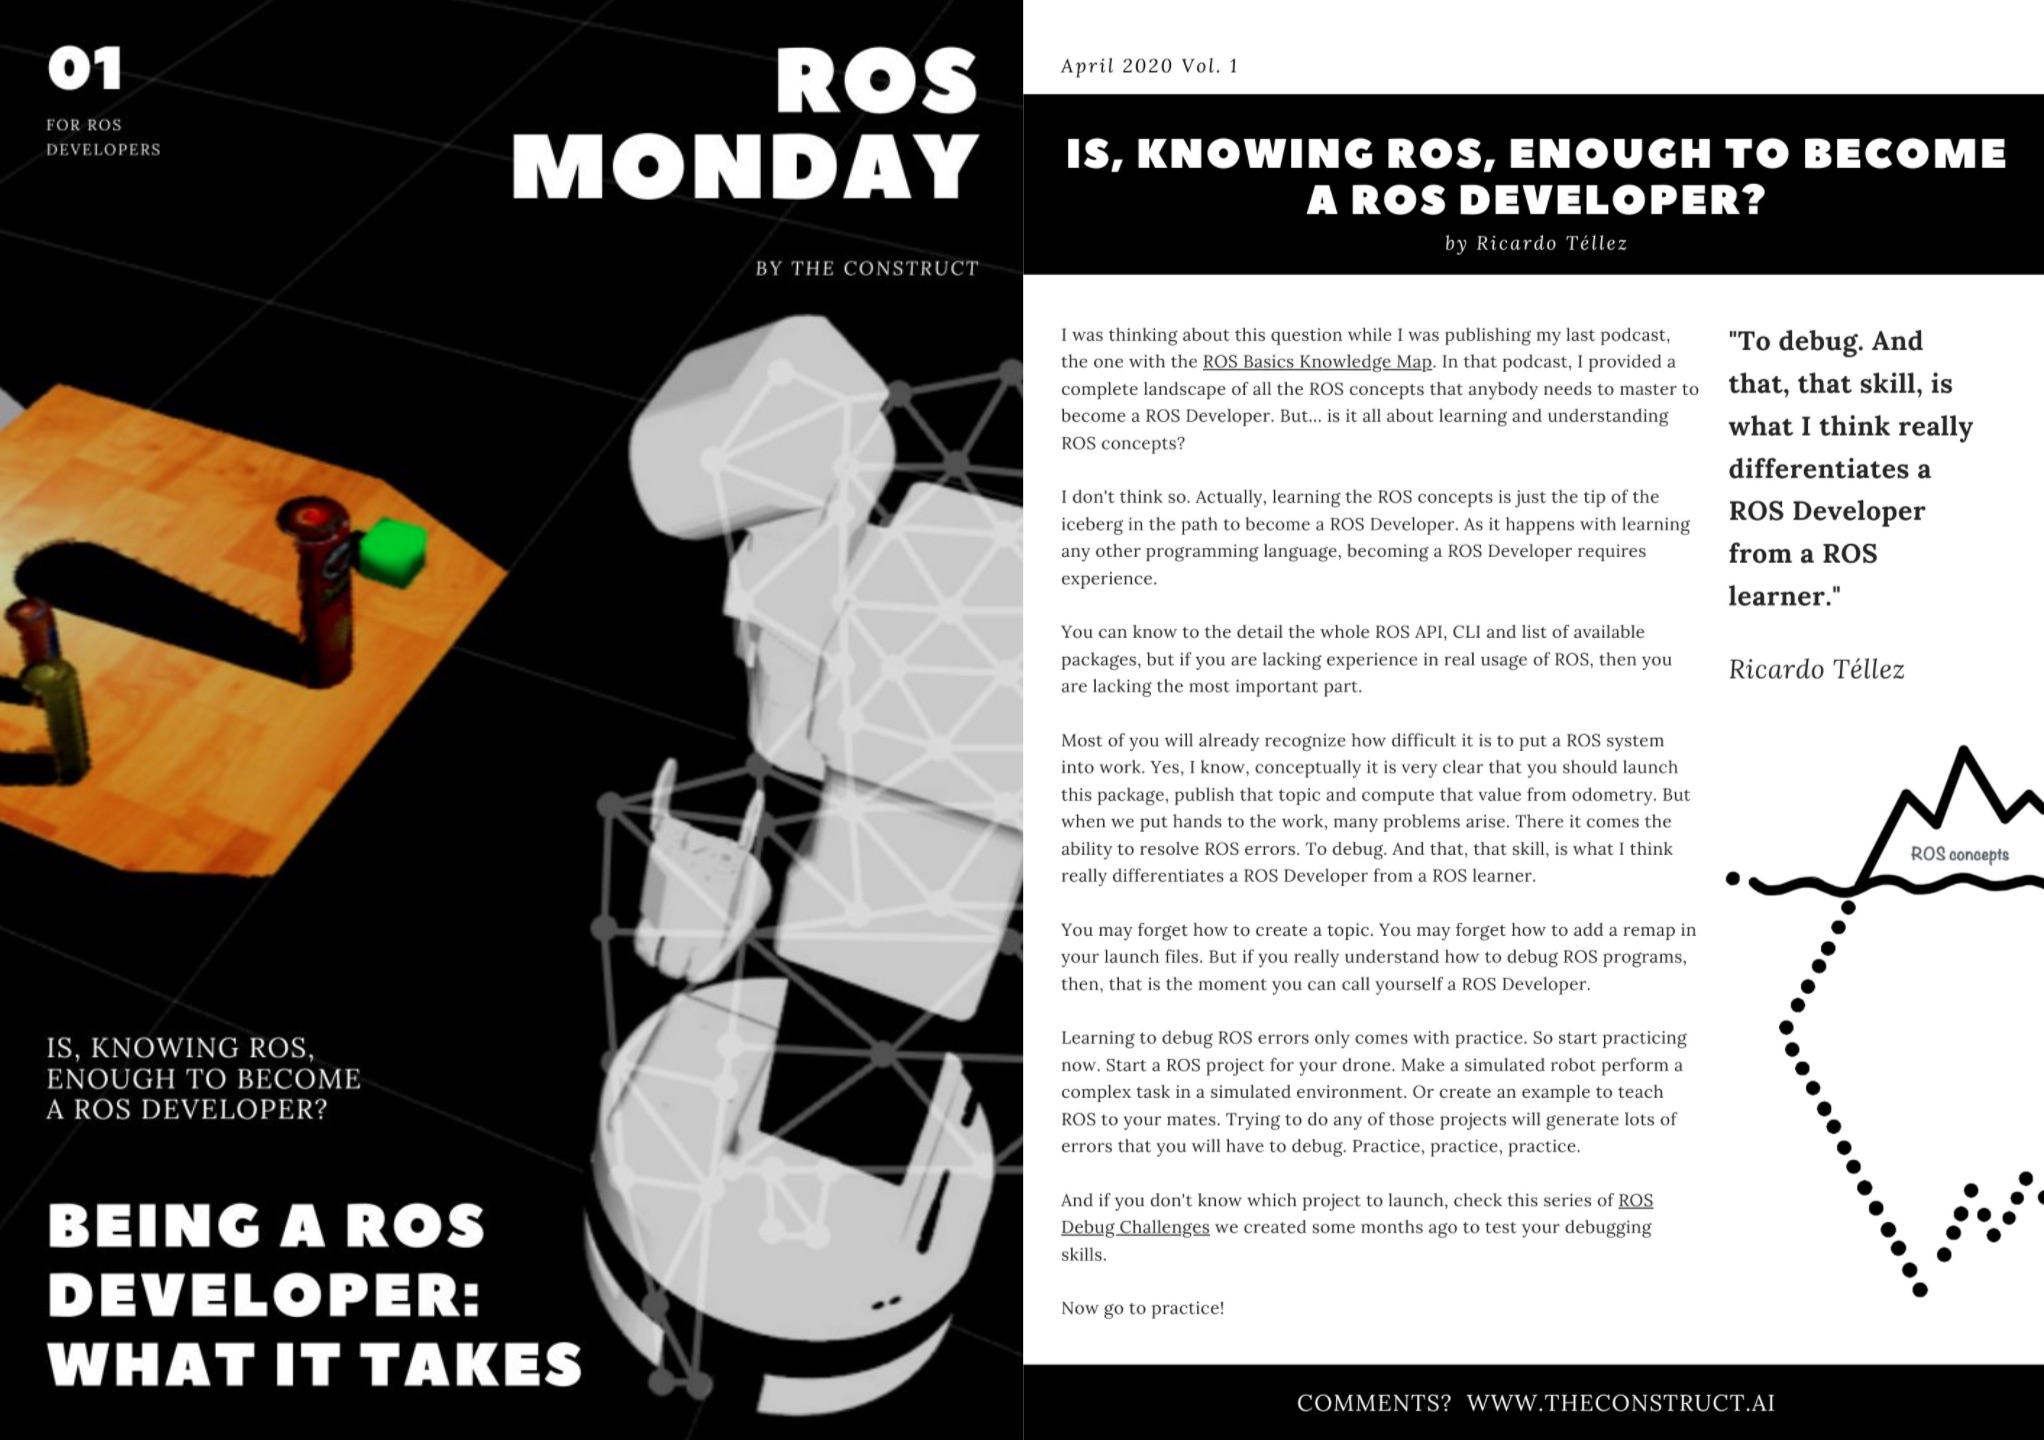 ROS Monday Vol.1 – Being a ROS Developer: what it takes